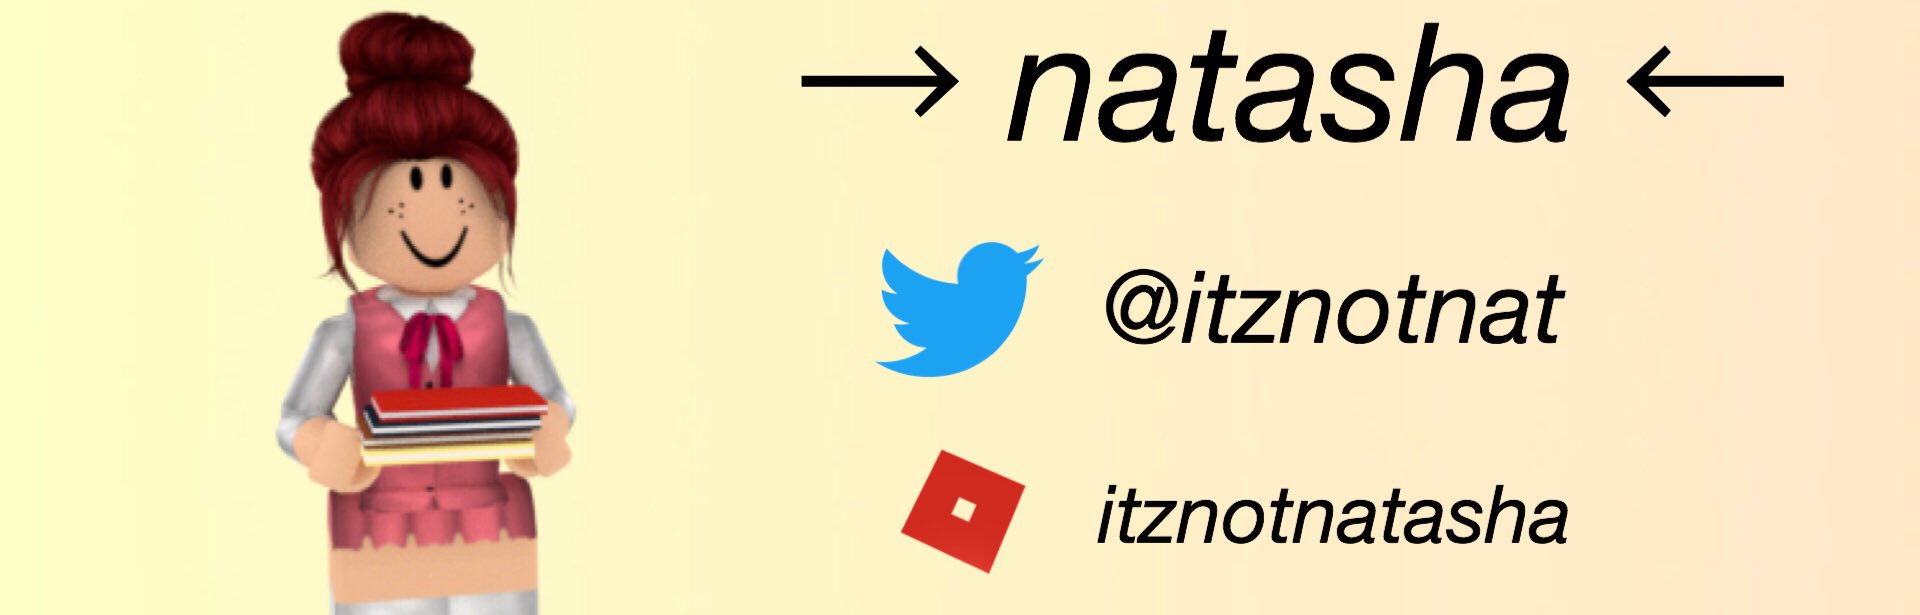 Natasha On Twitter I Guess I M Out Of My Bigger Gfx Groove So Just Came Up With A Few Different Style Gfx Banners The Pink One Is My Favourite Mainly Because Of - fhozzy on twitter roblox a gfx of my avatar i made a